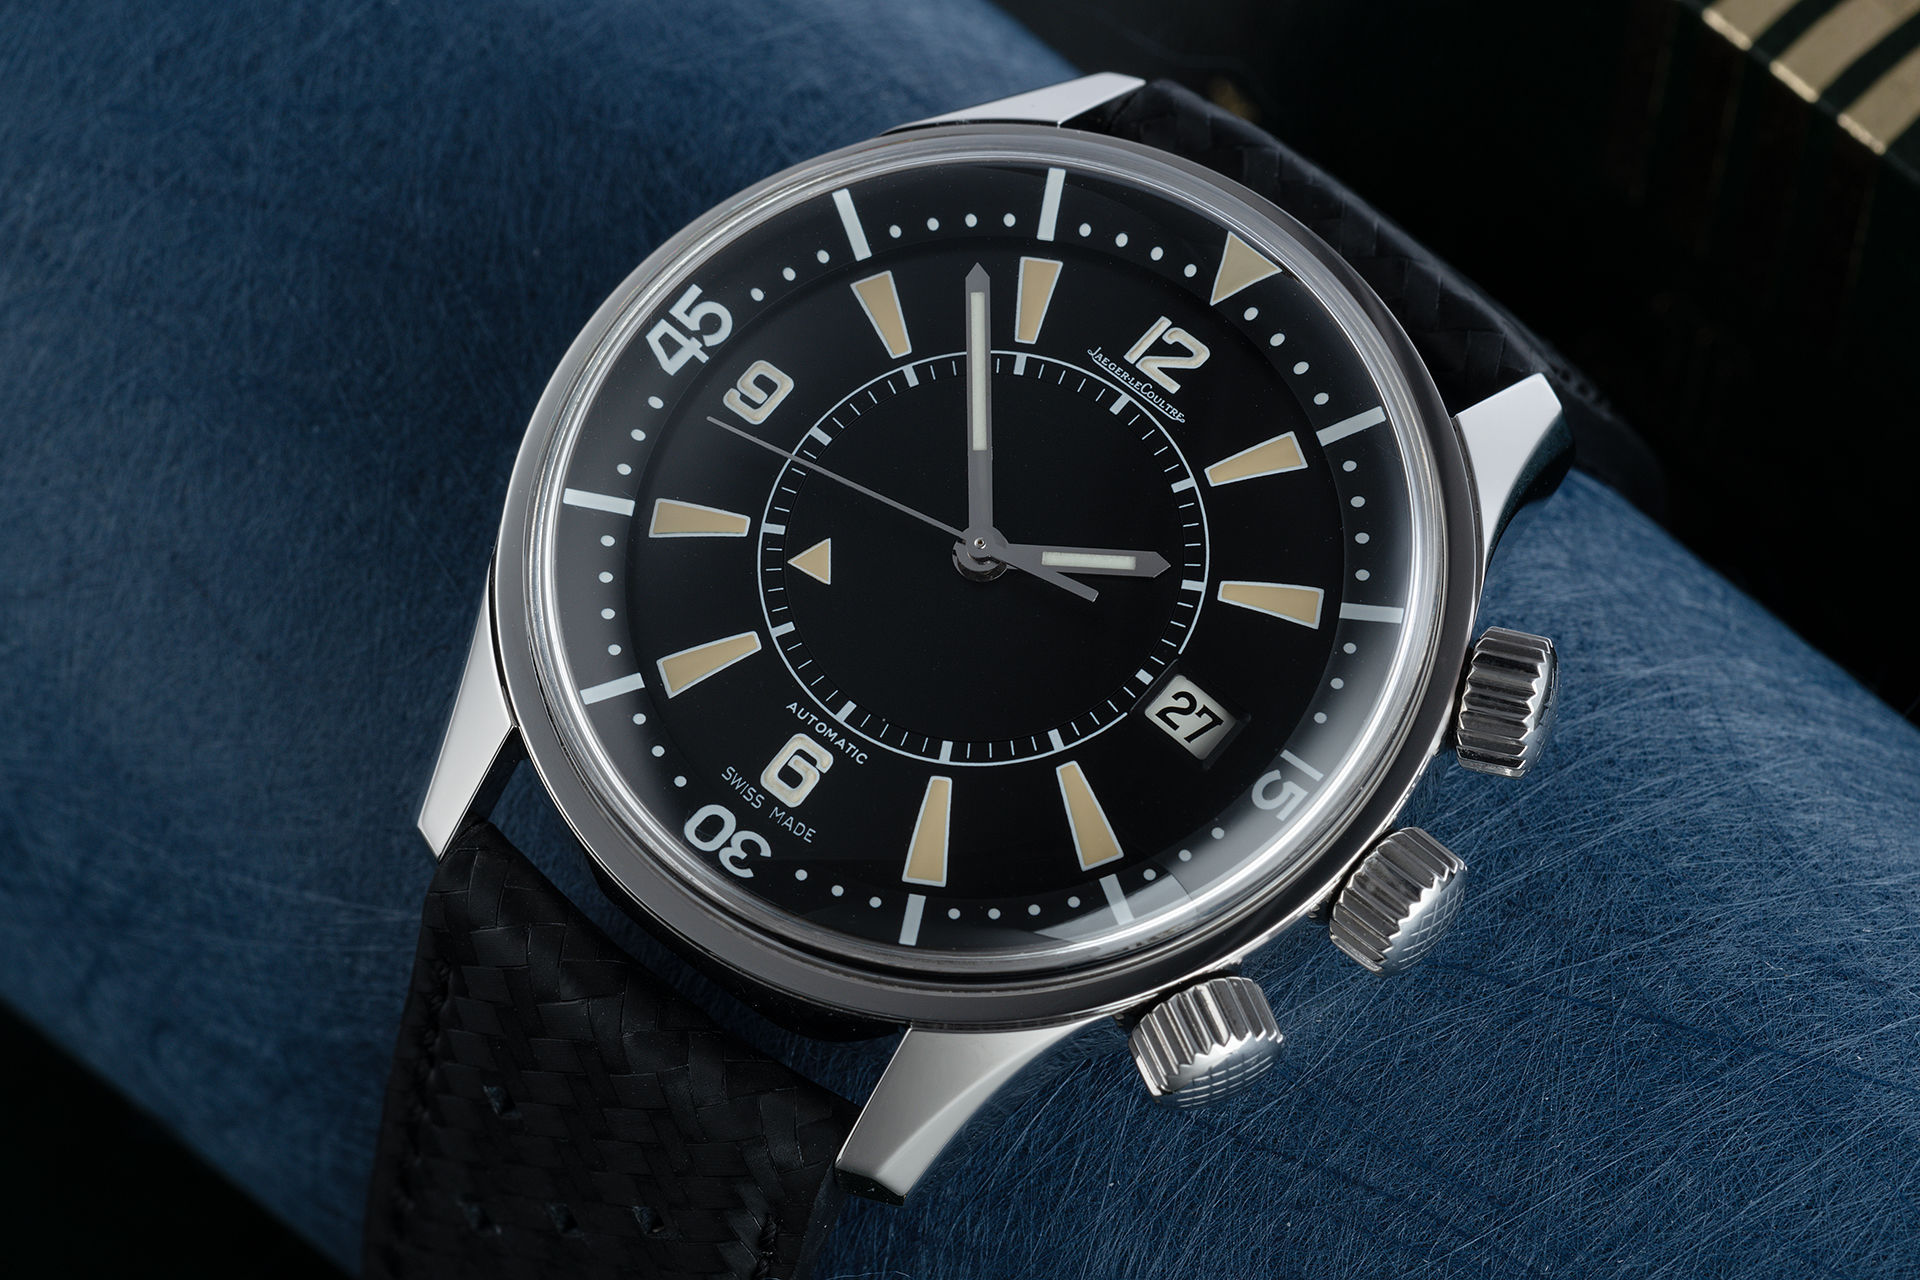 ref Q2008470 | Limited Edition 'One of 768' | Jaeger-leCoultre Memovox